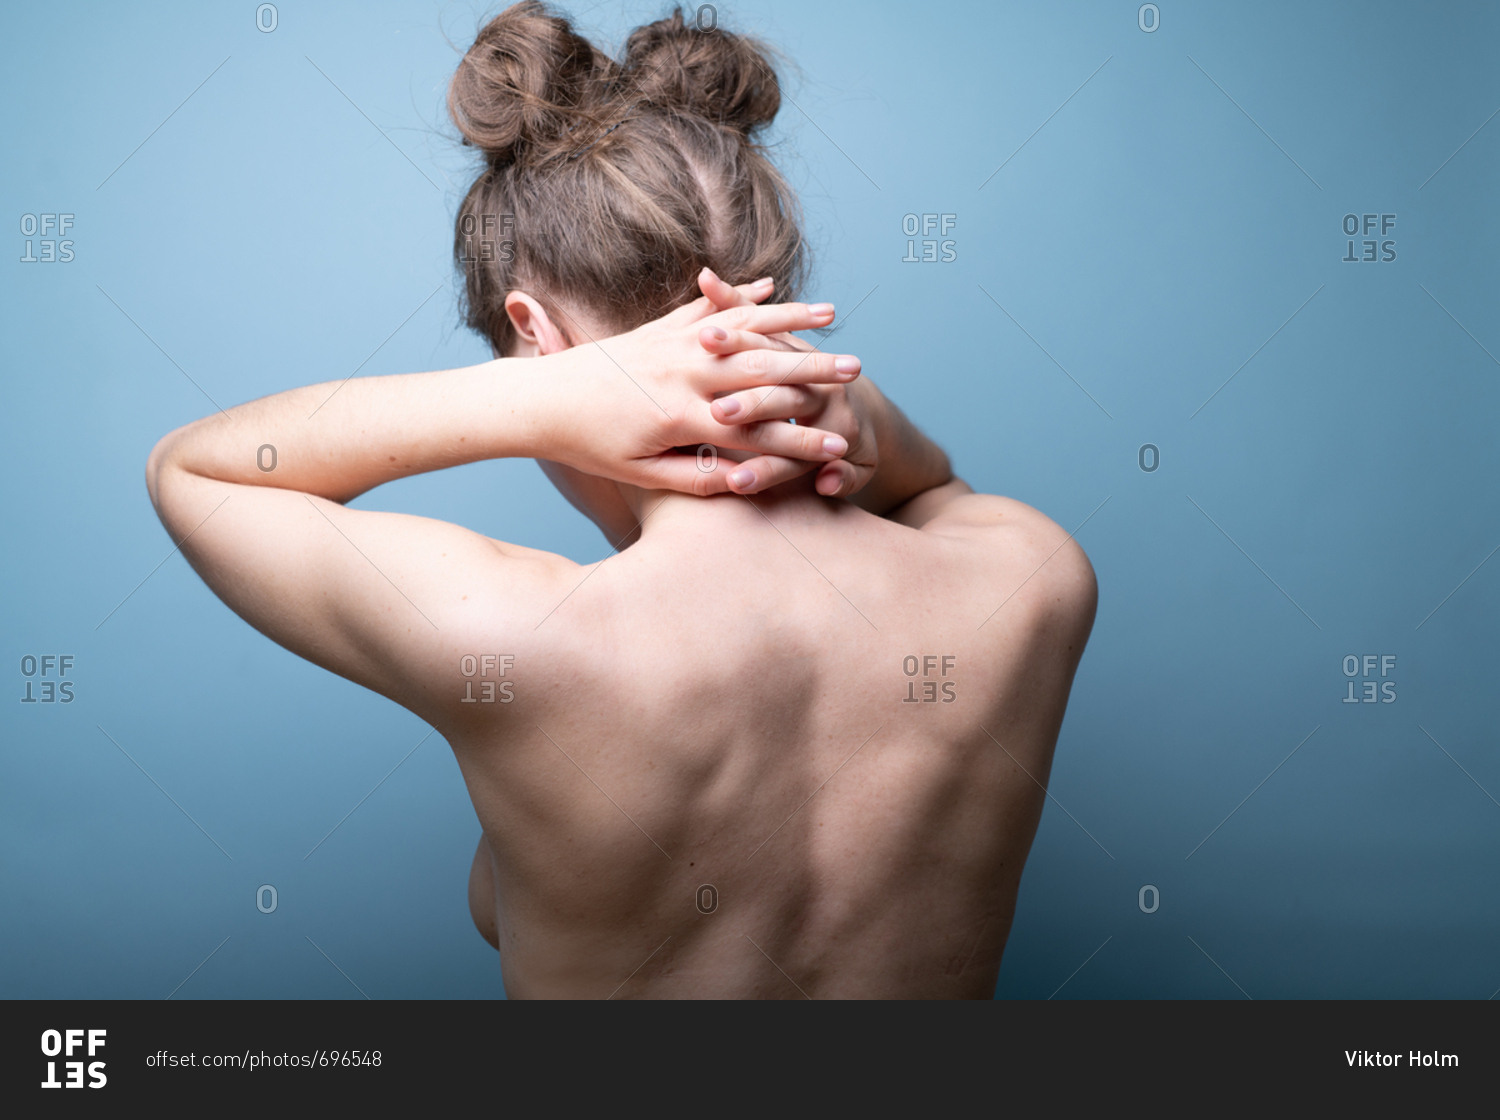 Female with pigtail hair buns putting hands behind neck on blue background